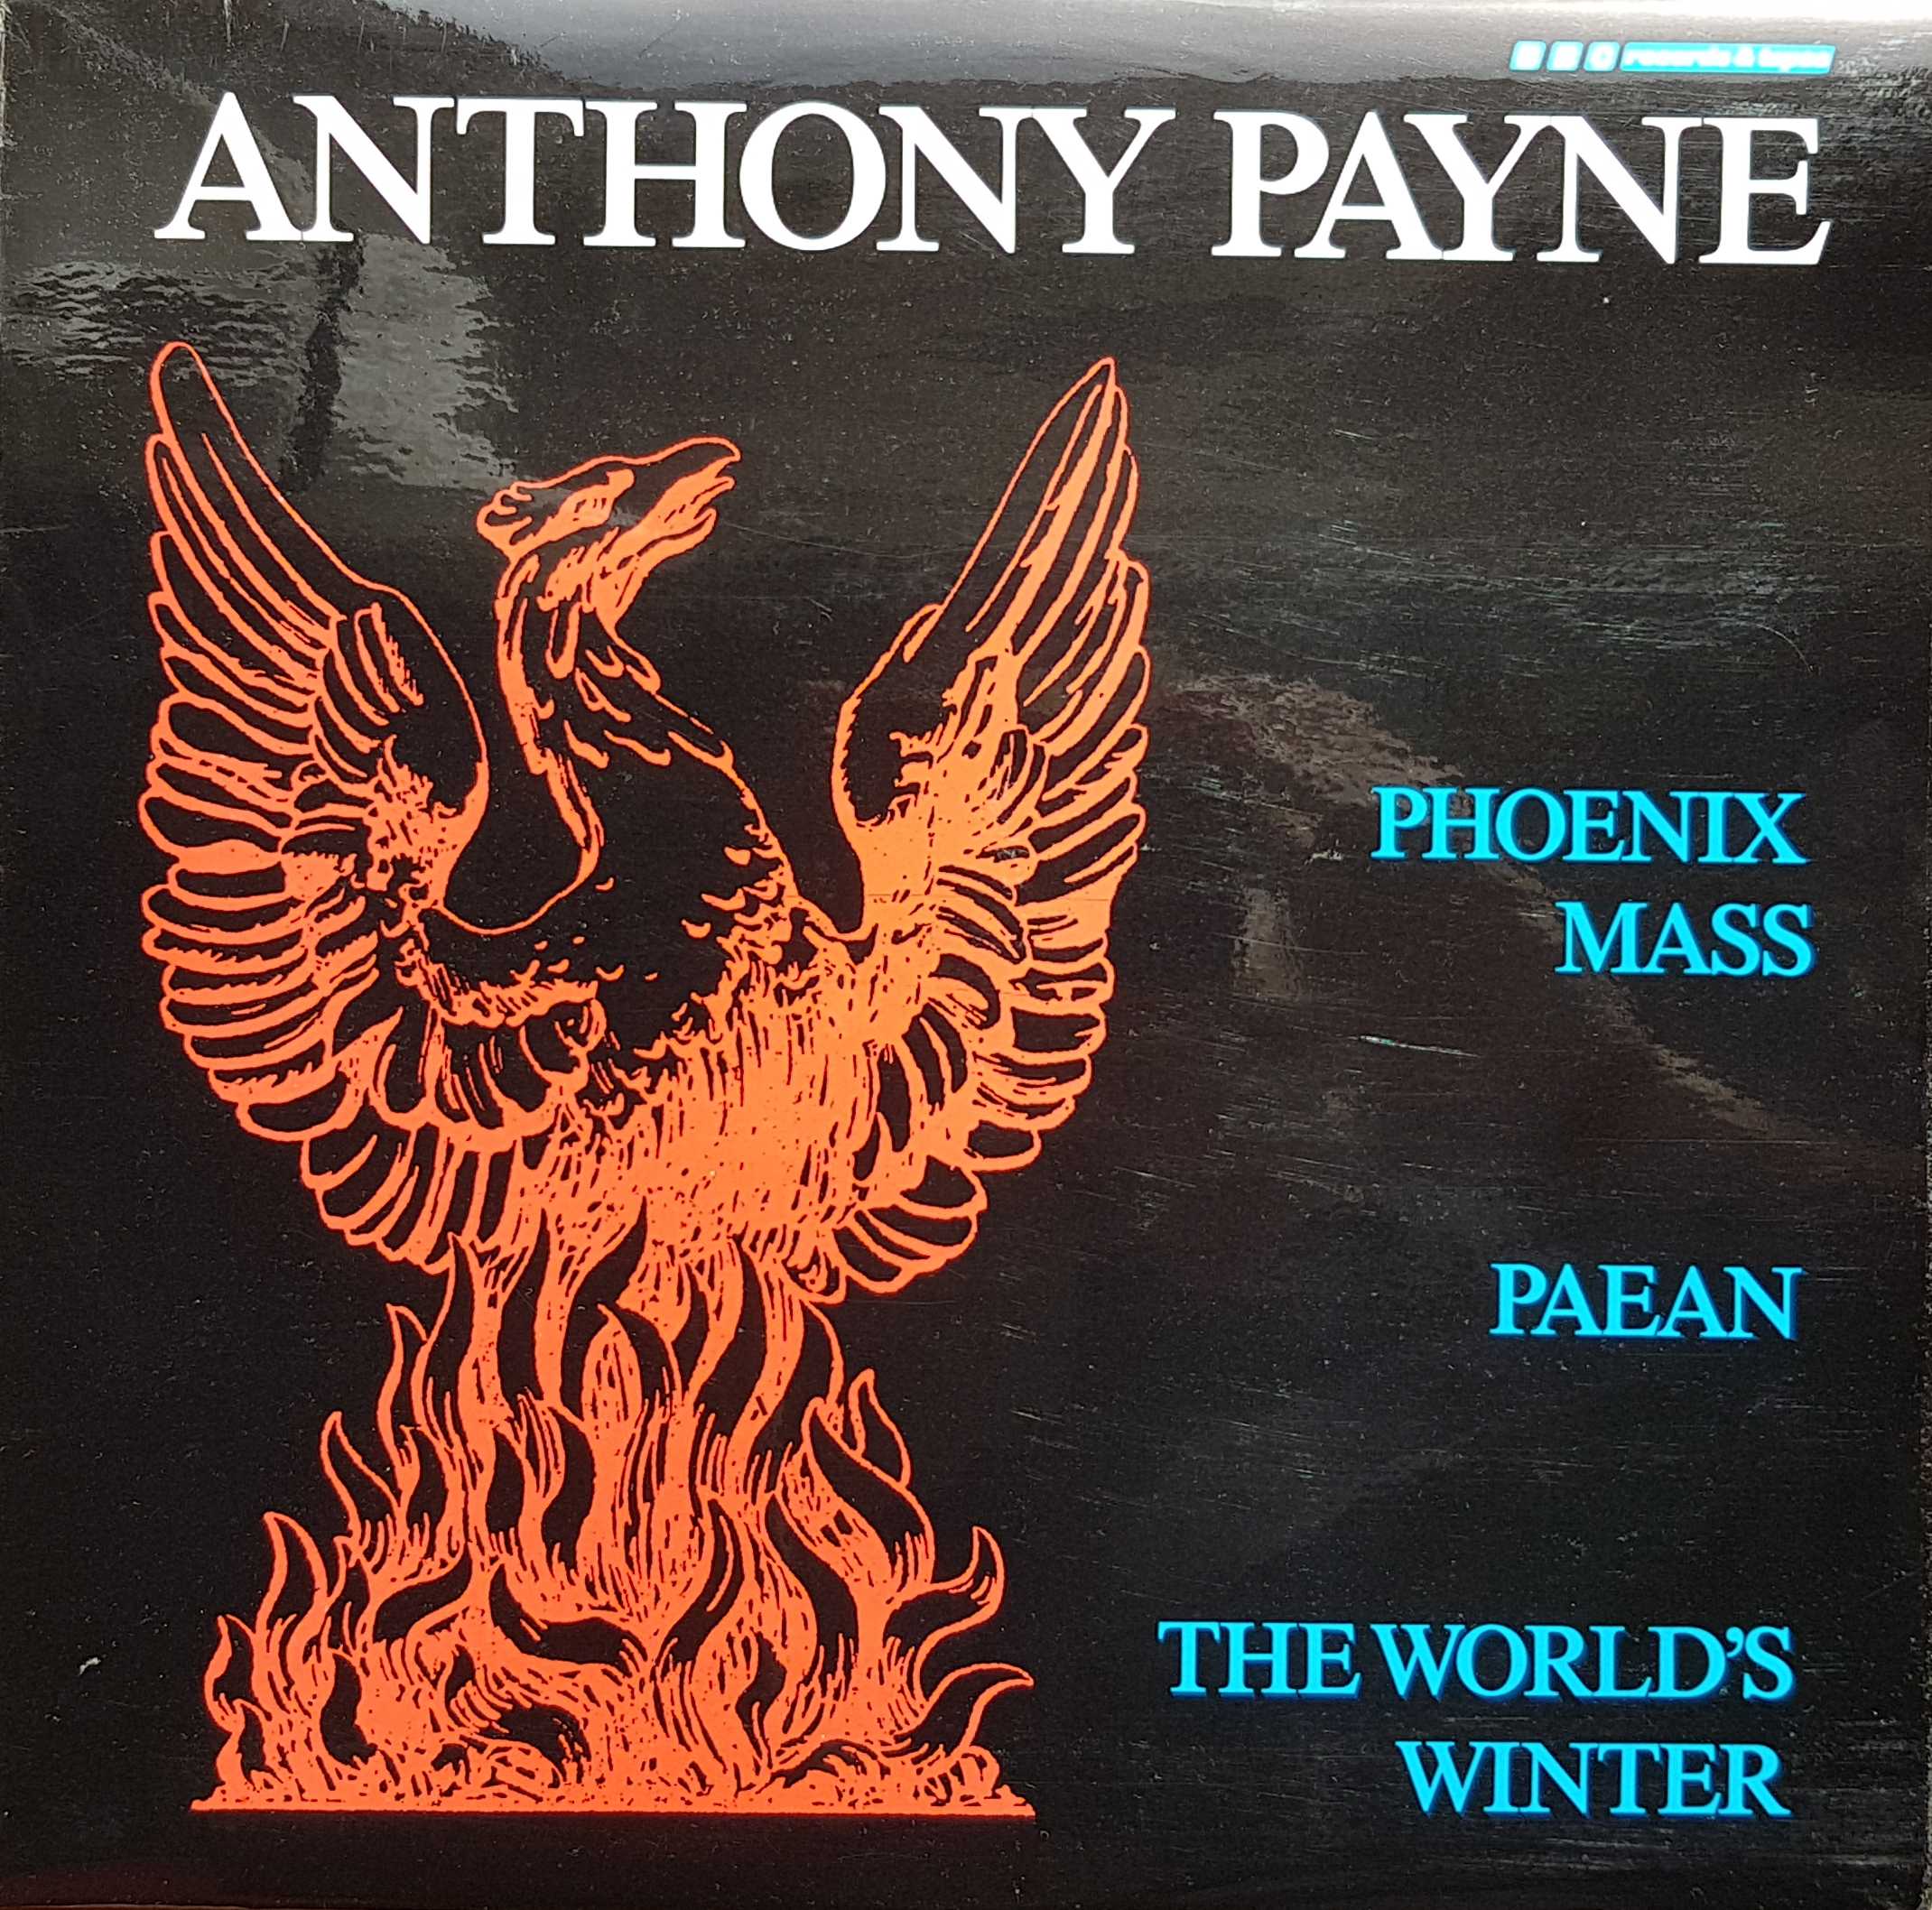 Picture of REH 297 The music of Anthony Payne by artist Anthony Payne from the BBC records and Tapes library